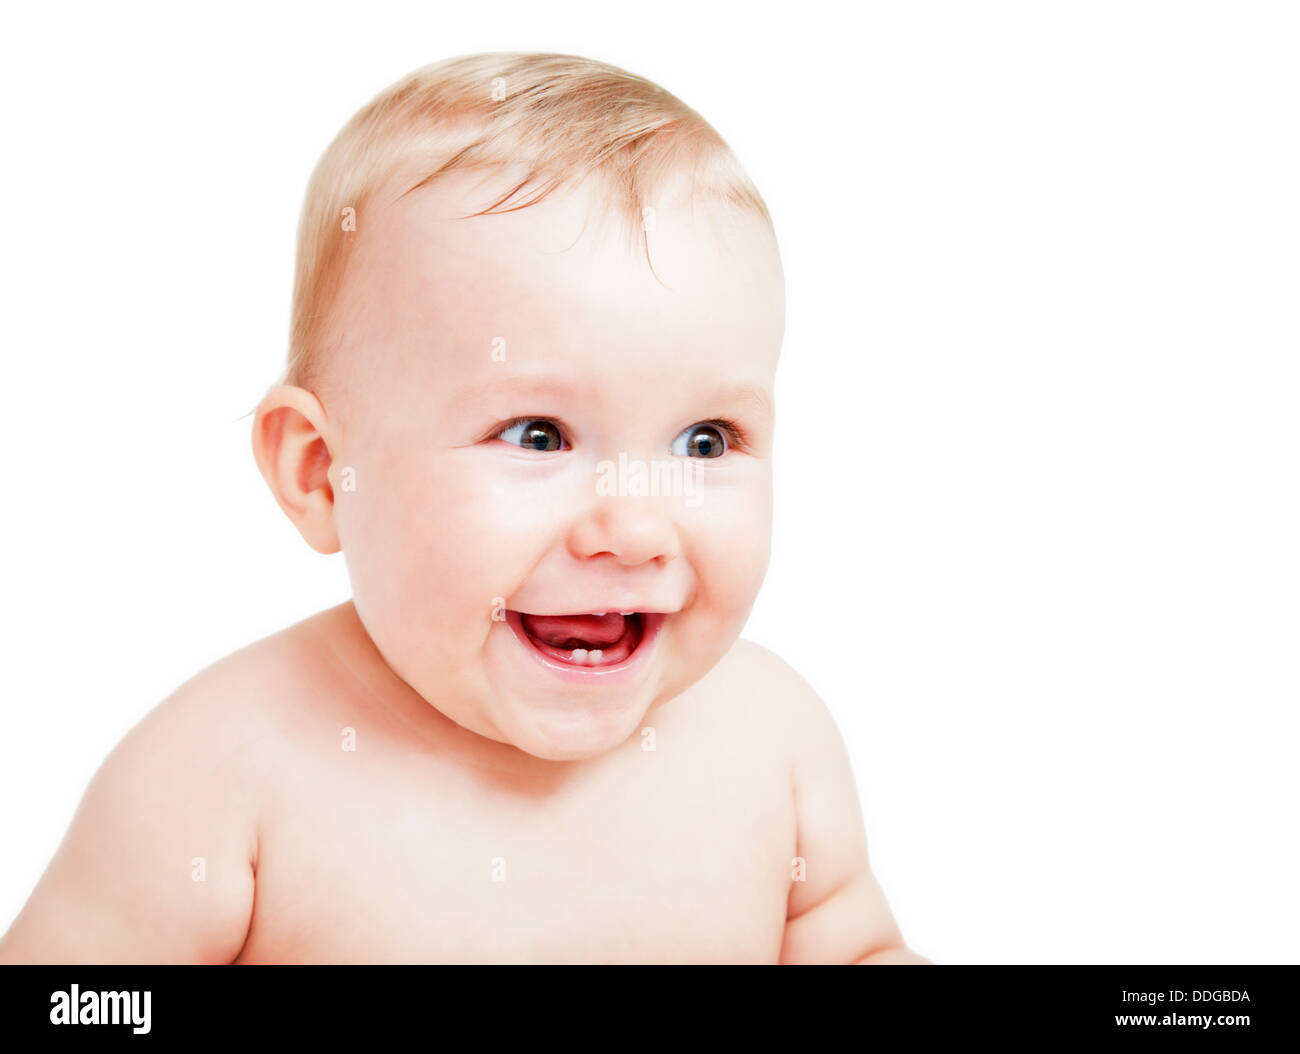 Cute happy baby smiling / laughing Banque D'Images